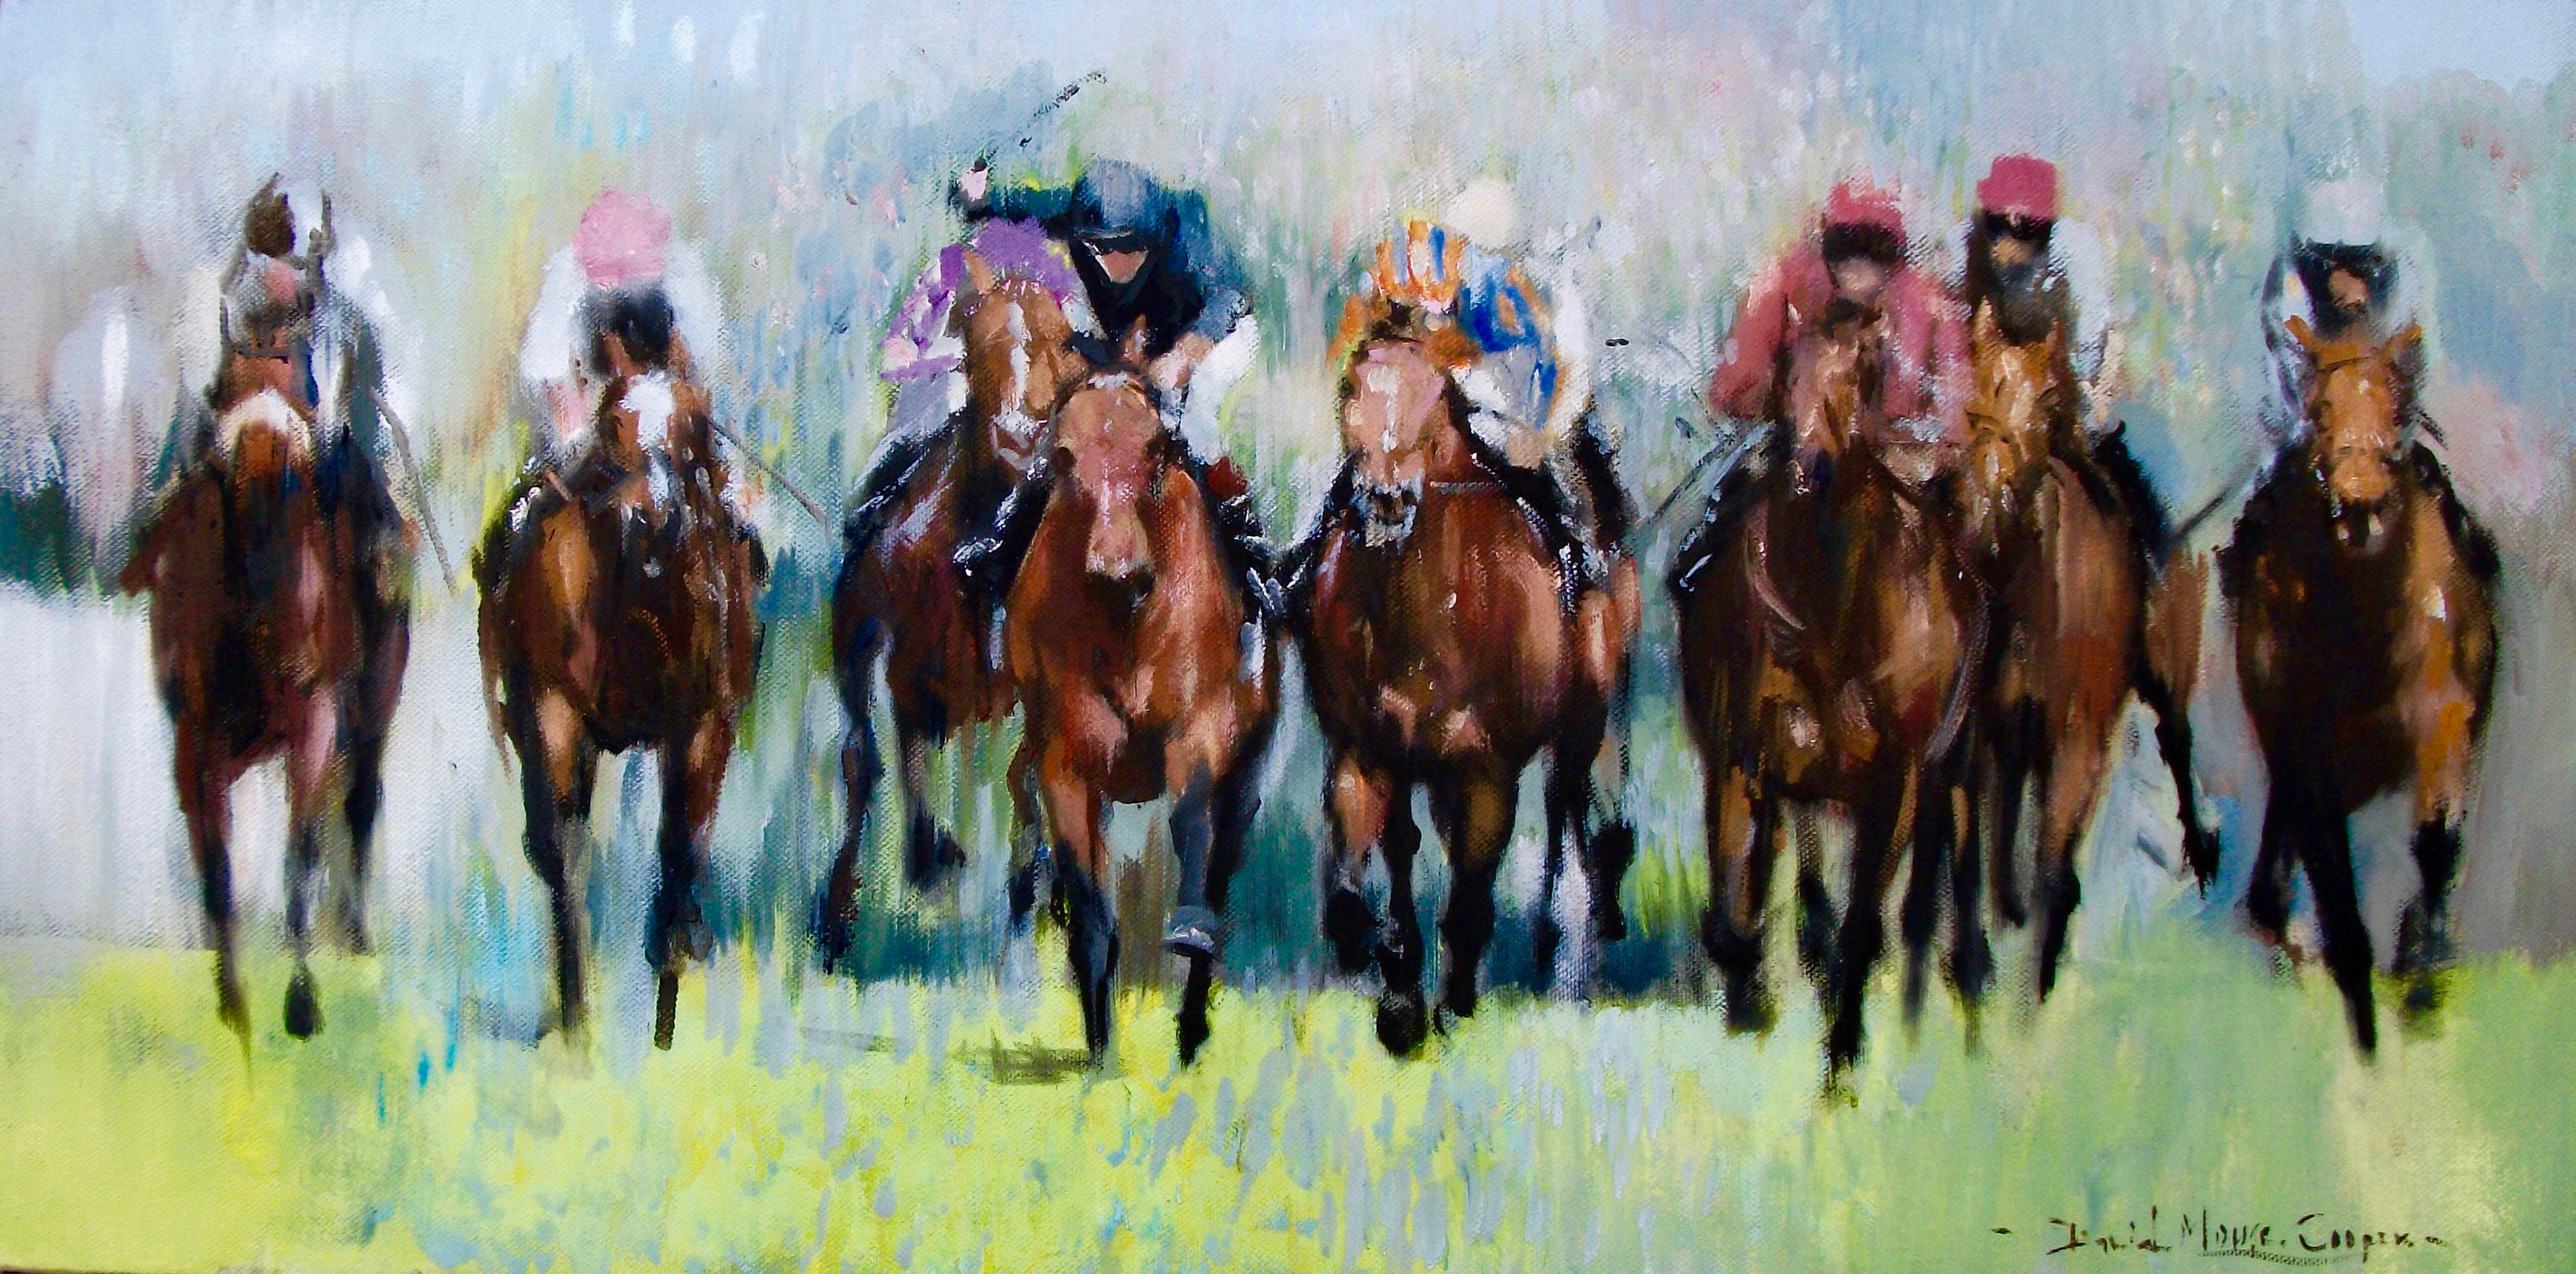 "Driving Finish" by David Mouse Cooper